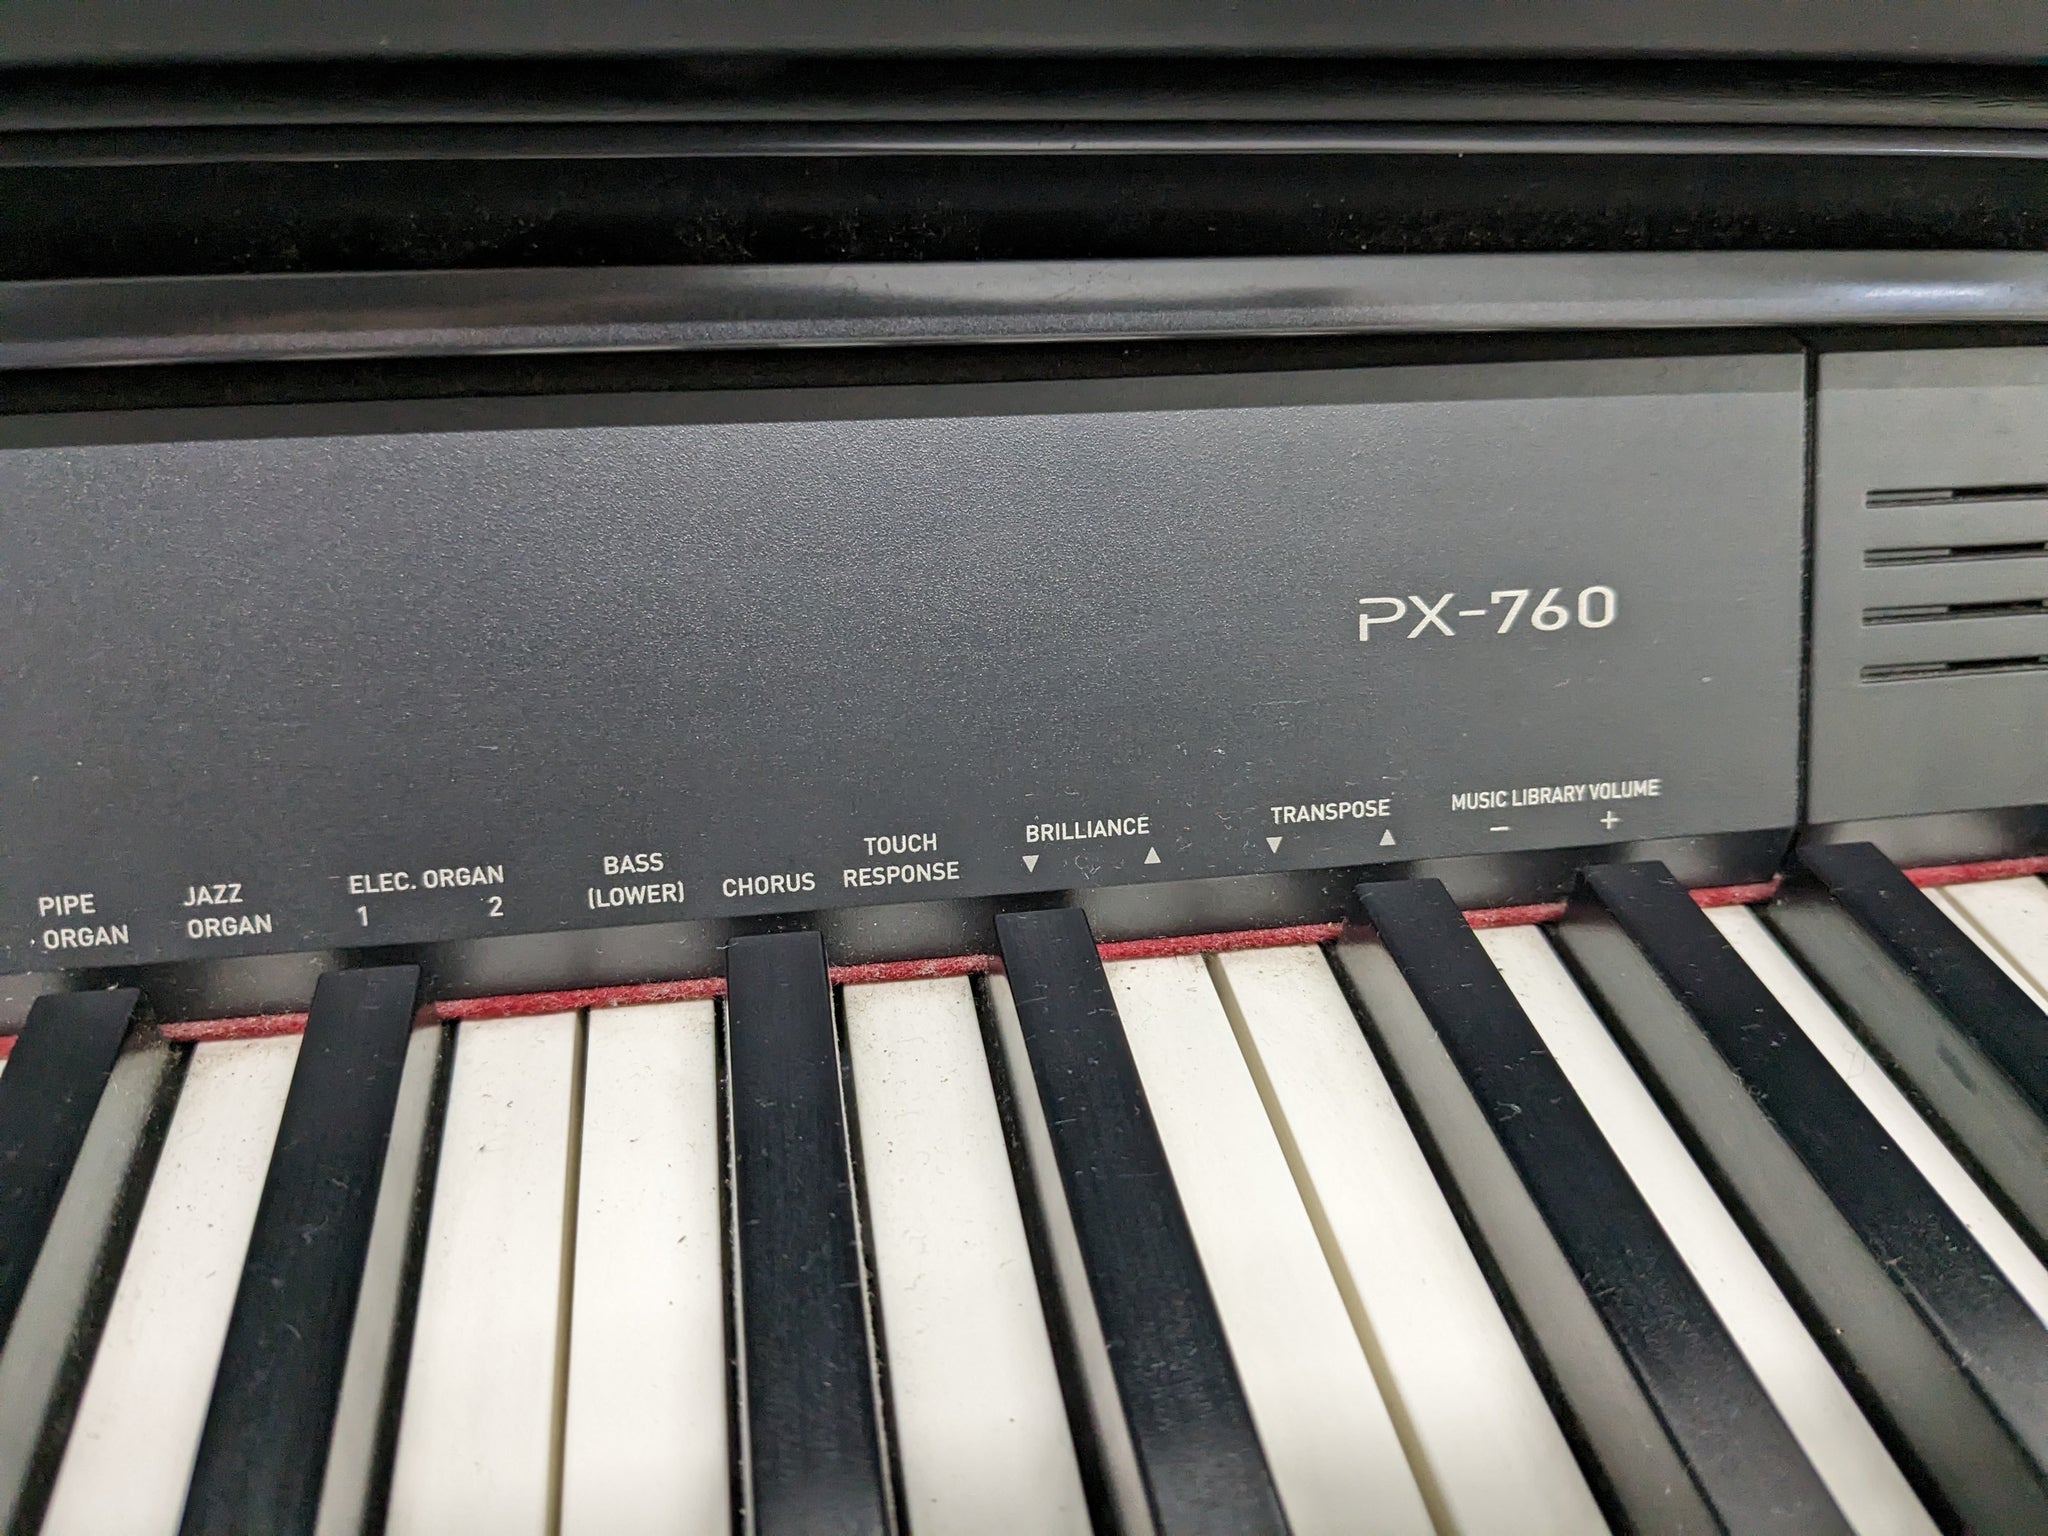 PX-760, Privia, Electronic Musical Instruments